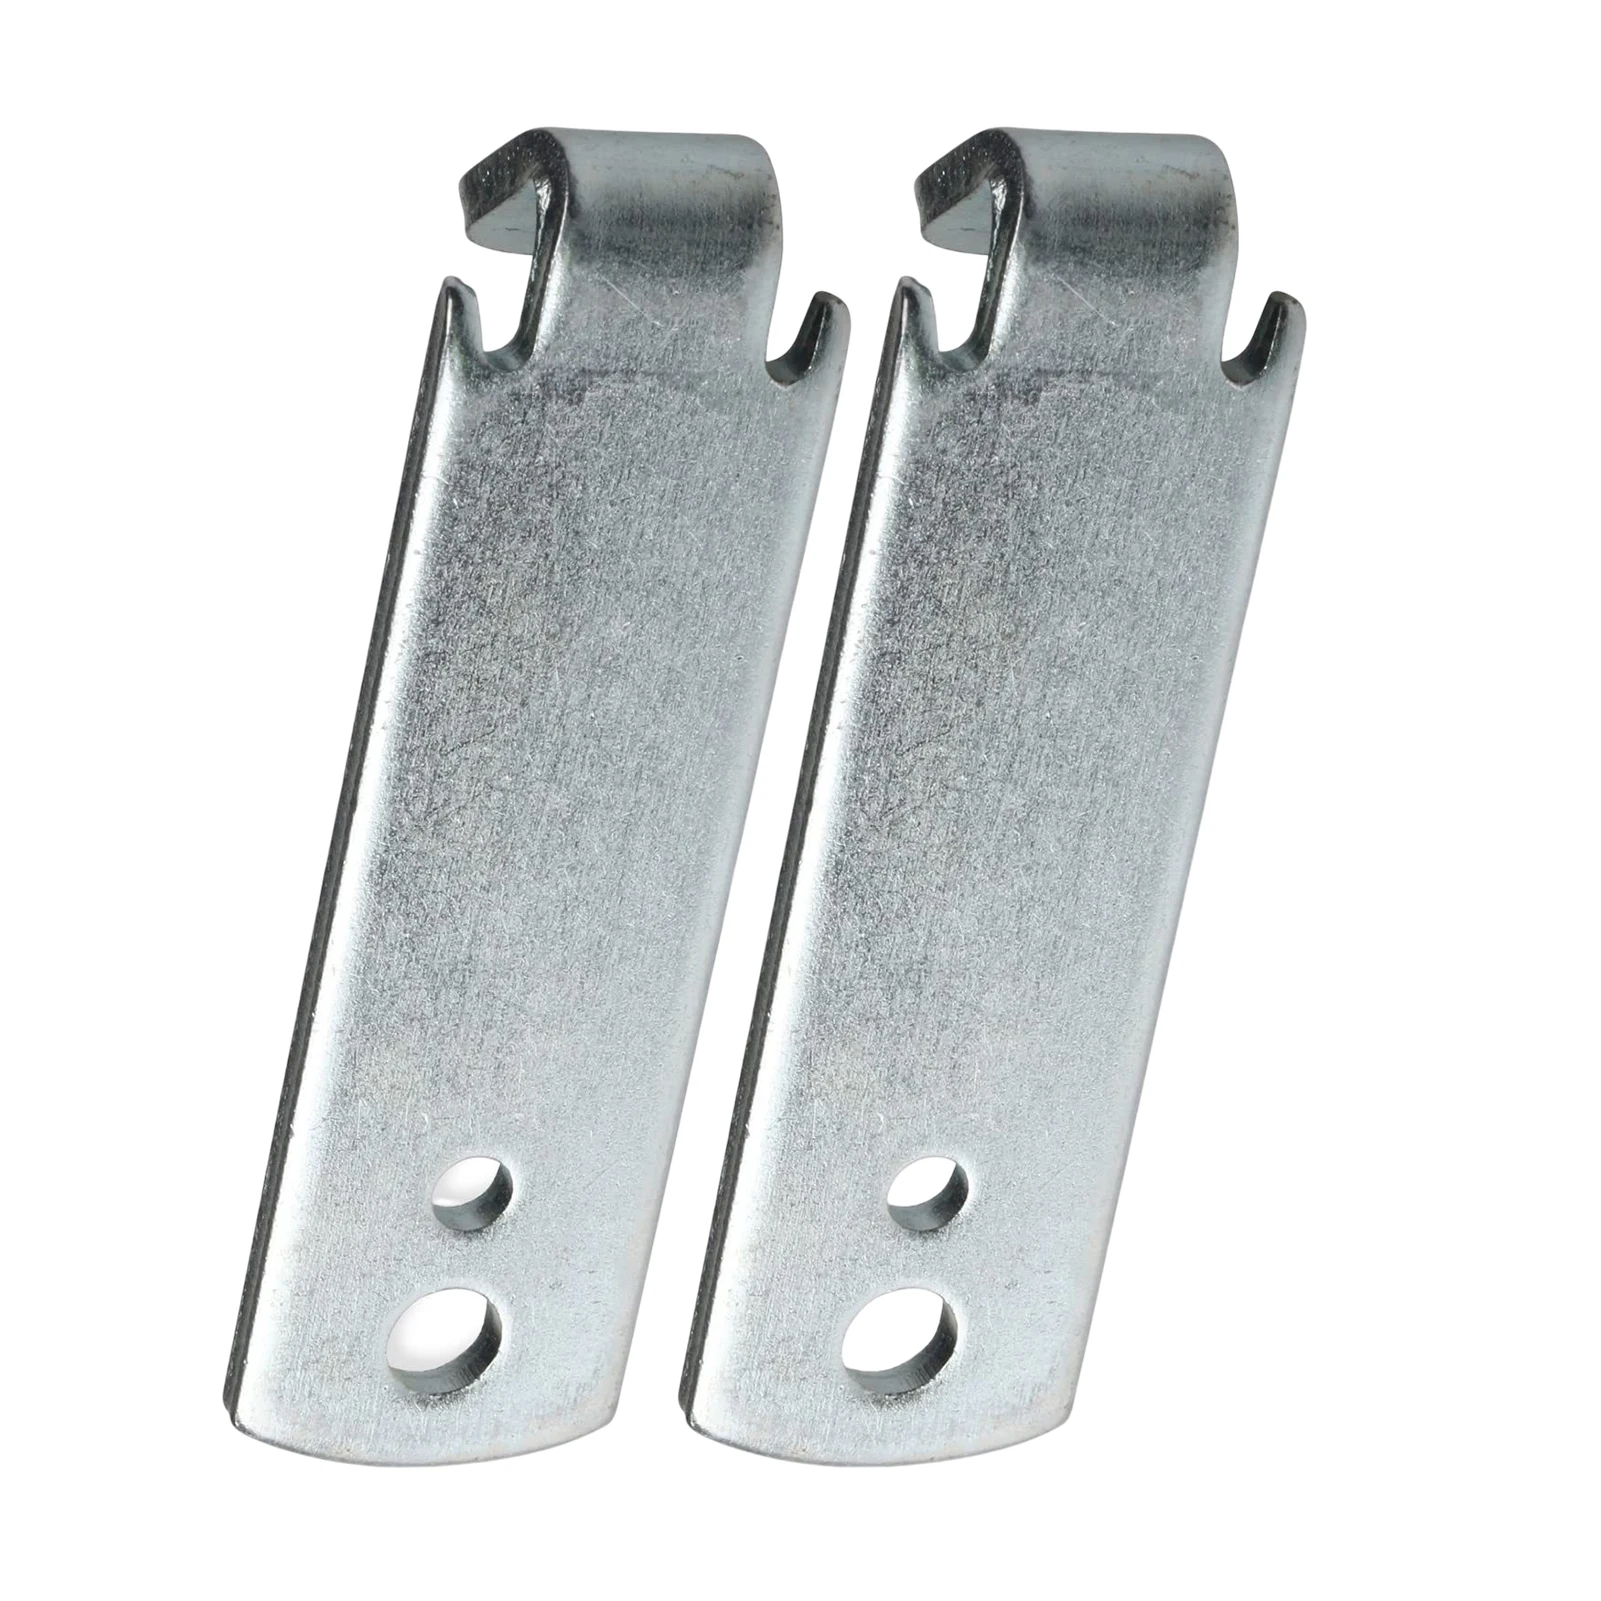 

2pcs 2 Hole T Post Clips Durable Fixing Time Saver Multi-functional Strong Carbon Steel Silver Galvanized Fence Wire Tool Barb